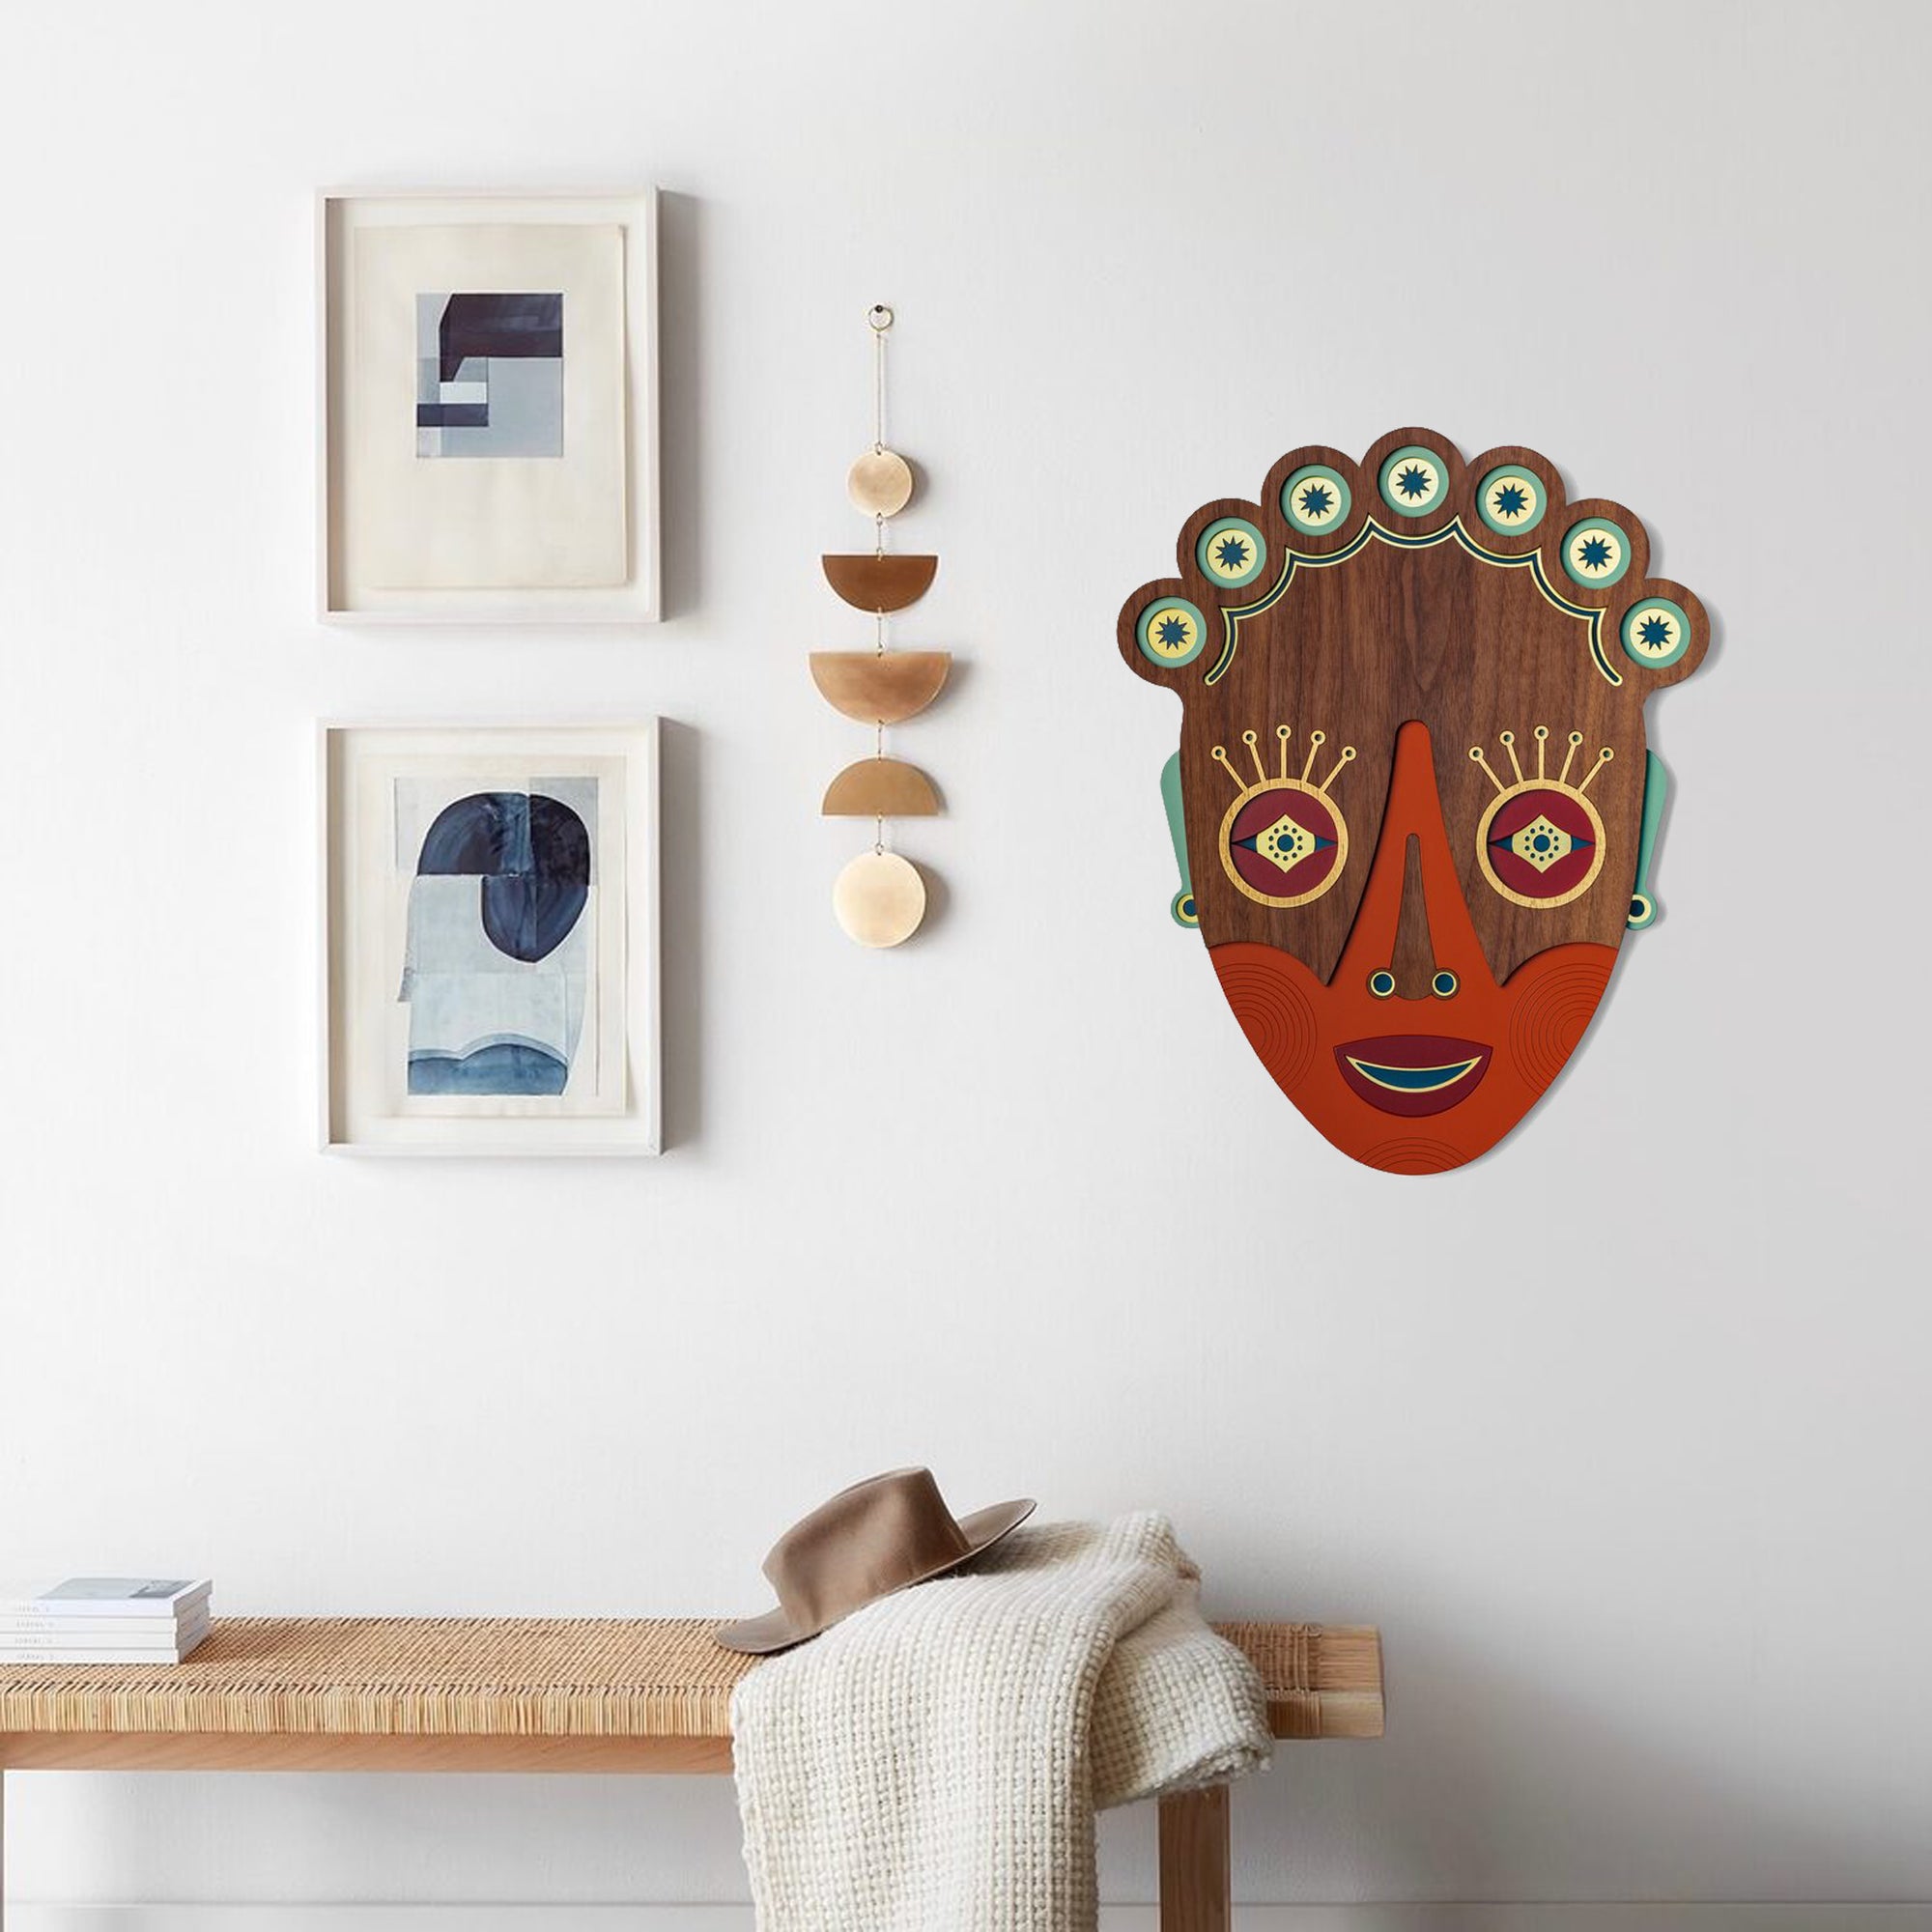 Home Sweet Home Wall Decor by African Masks